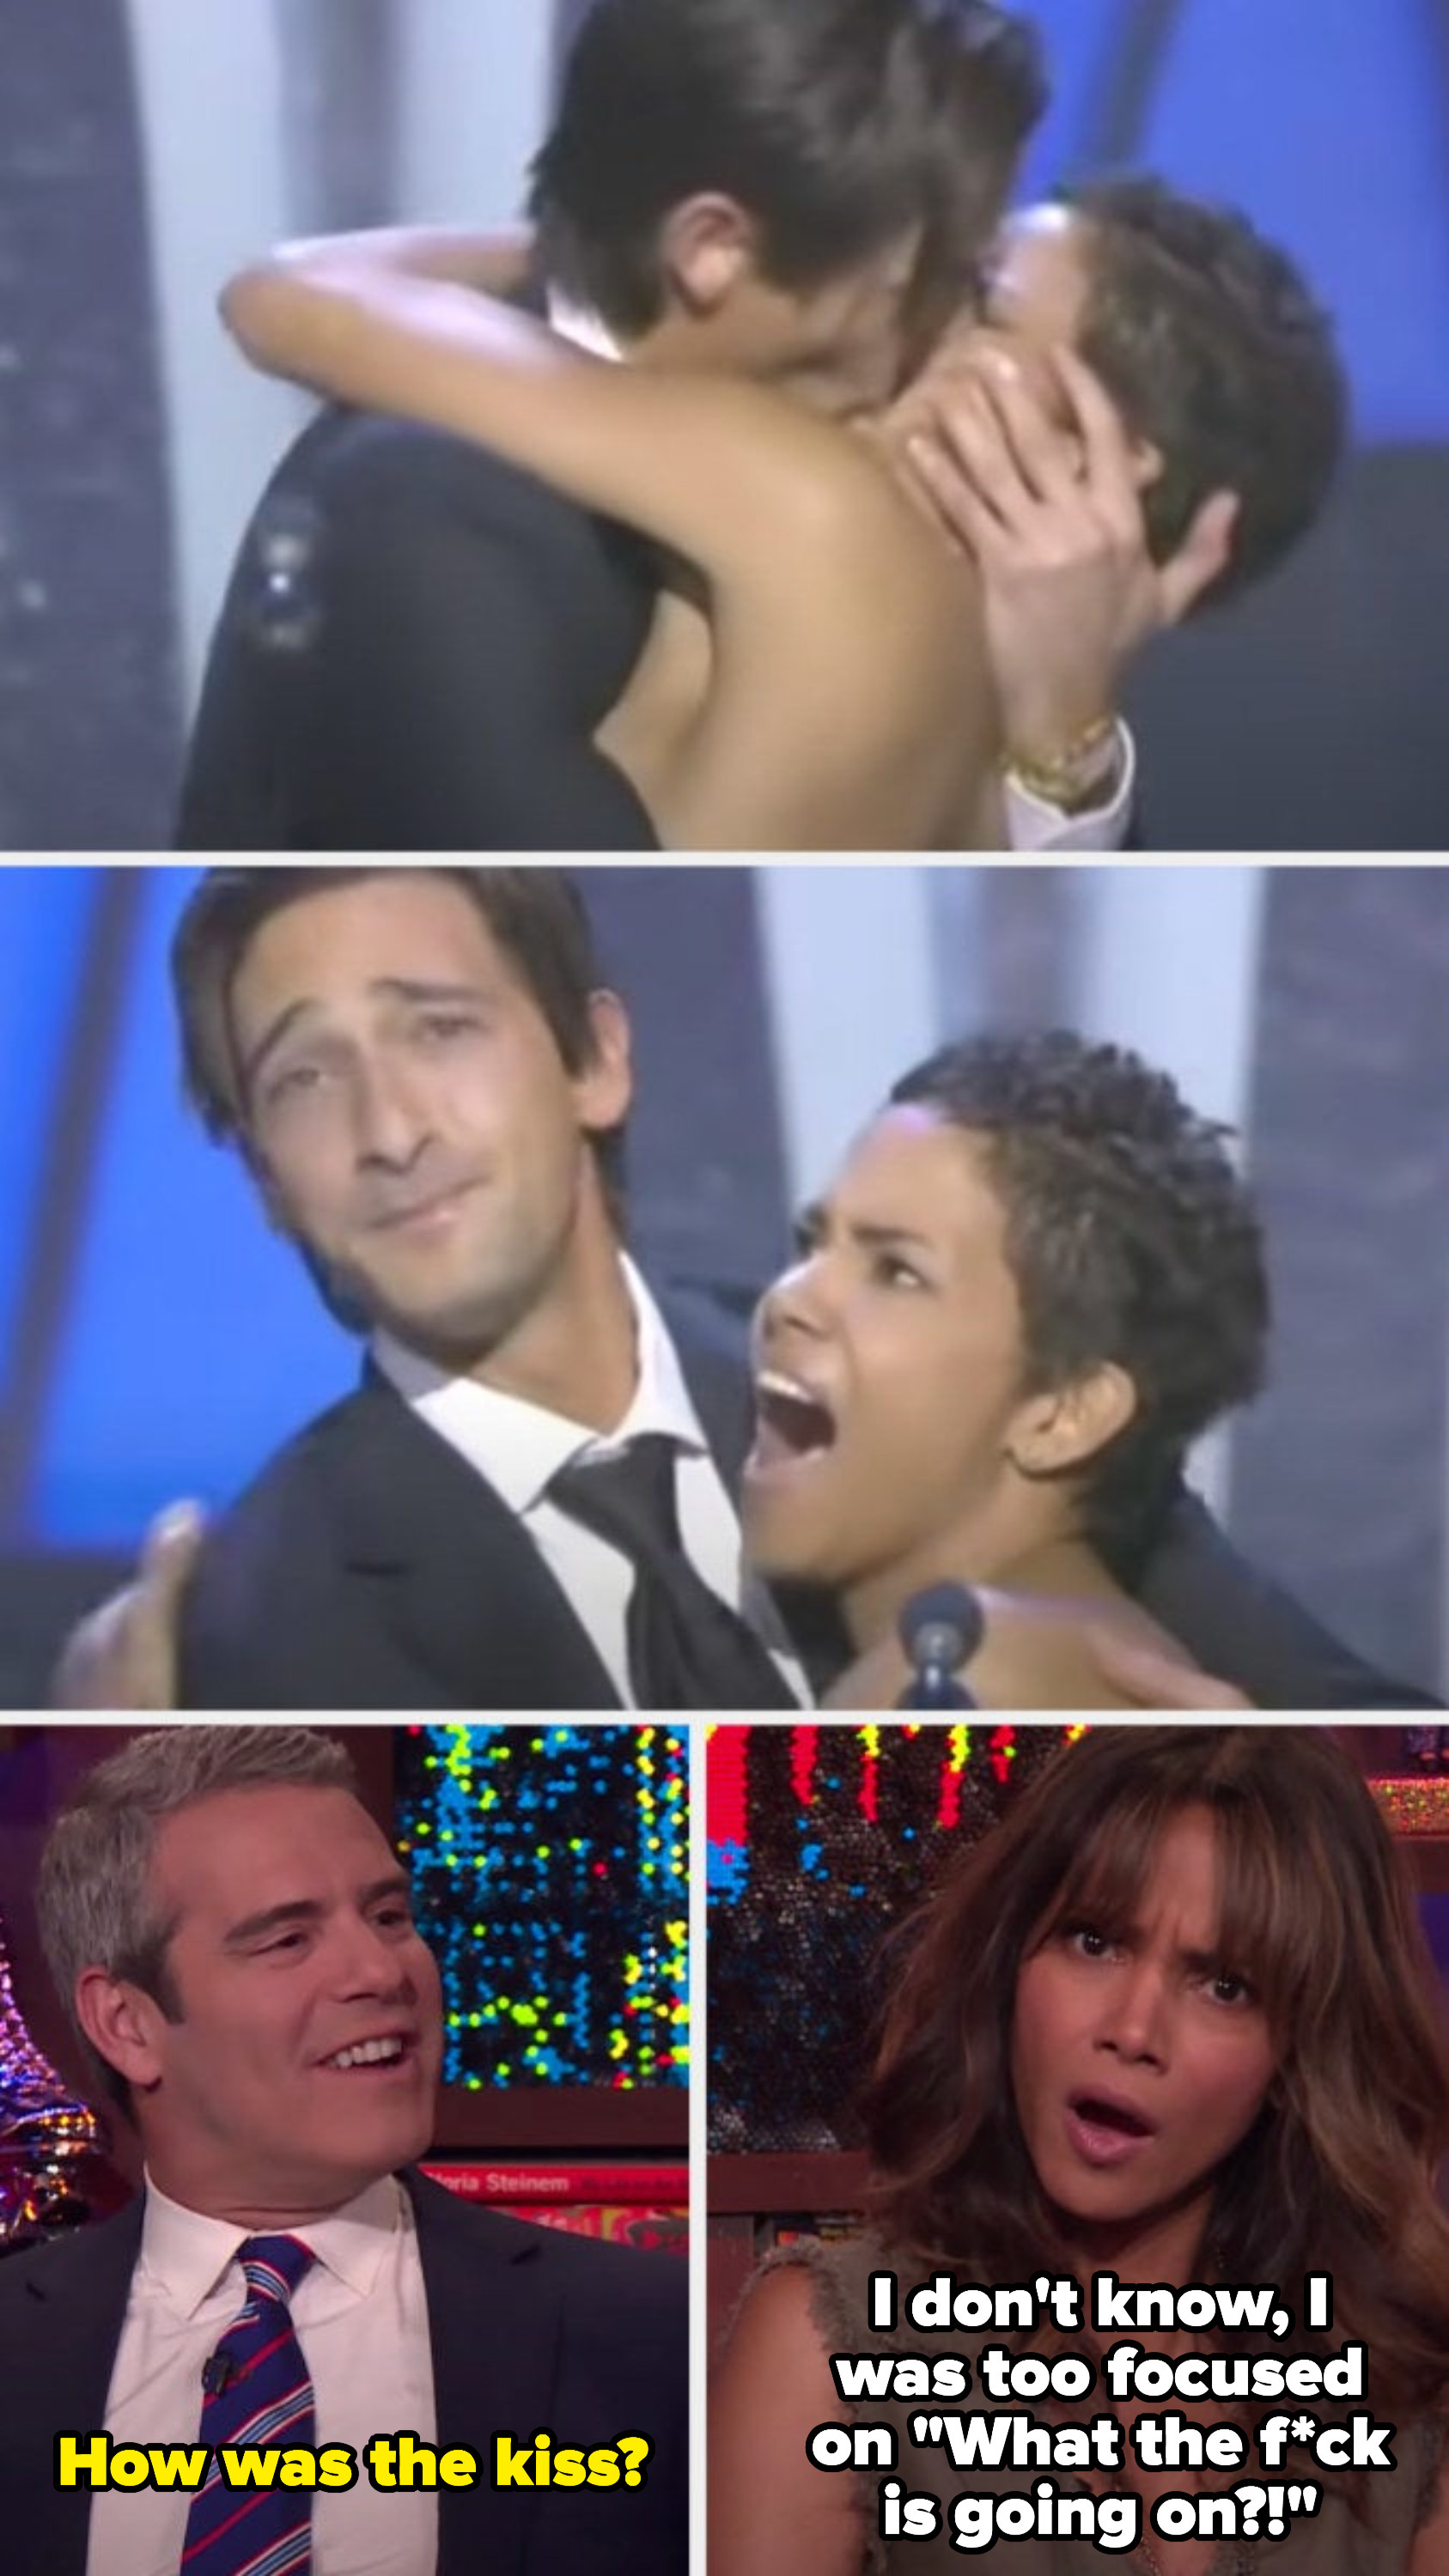 Andy Cohen asking Halle Berry how the kiss was, and she responded by saying, &quot;I don&#x27;t know, I was too focused on &#x27;What the f*ck is going on?!&#x27;&quot;